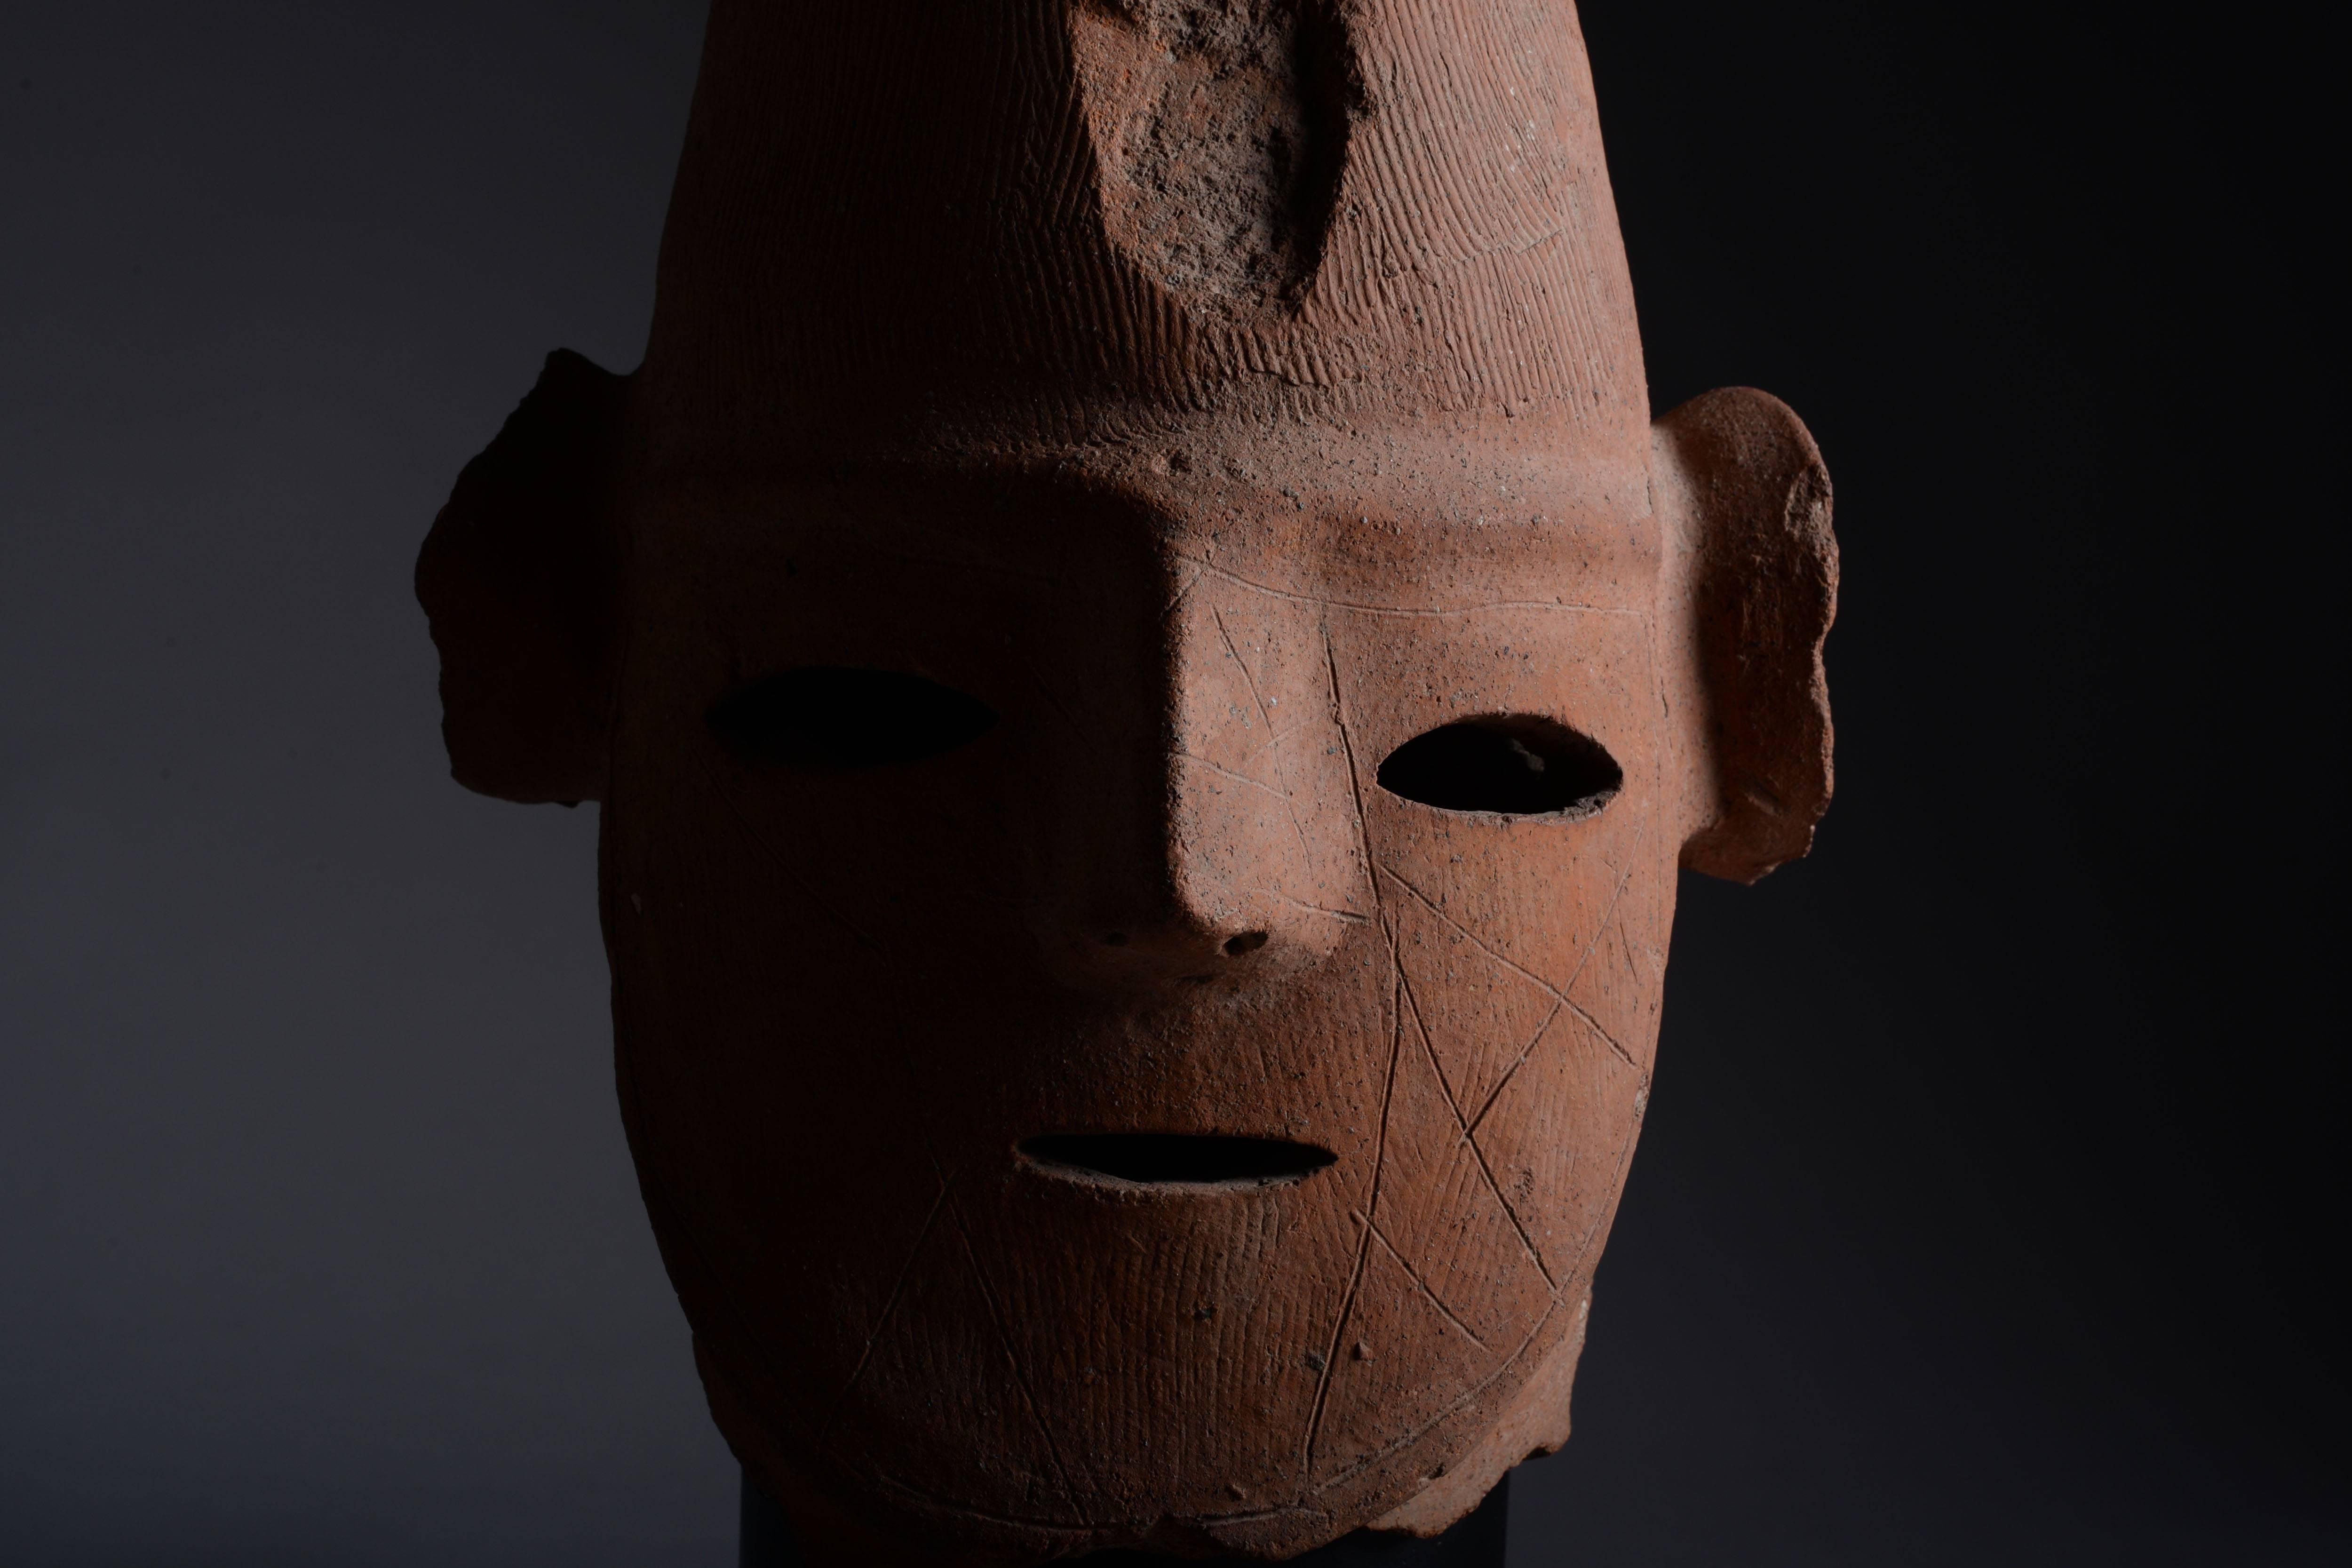 An exceptional example of Japanese Haniwa sculpture, dating to the Kofun (or Tumulus) Period, 4th-6th century AD.

The figure, probably depicting a shaman or shamaness, is shown with tall bifurcated headdress and large conical ears, the austere